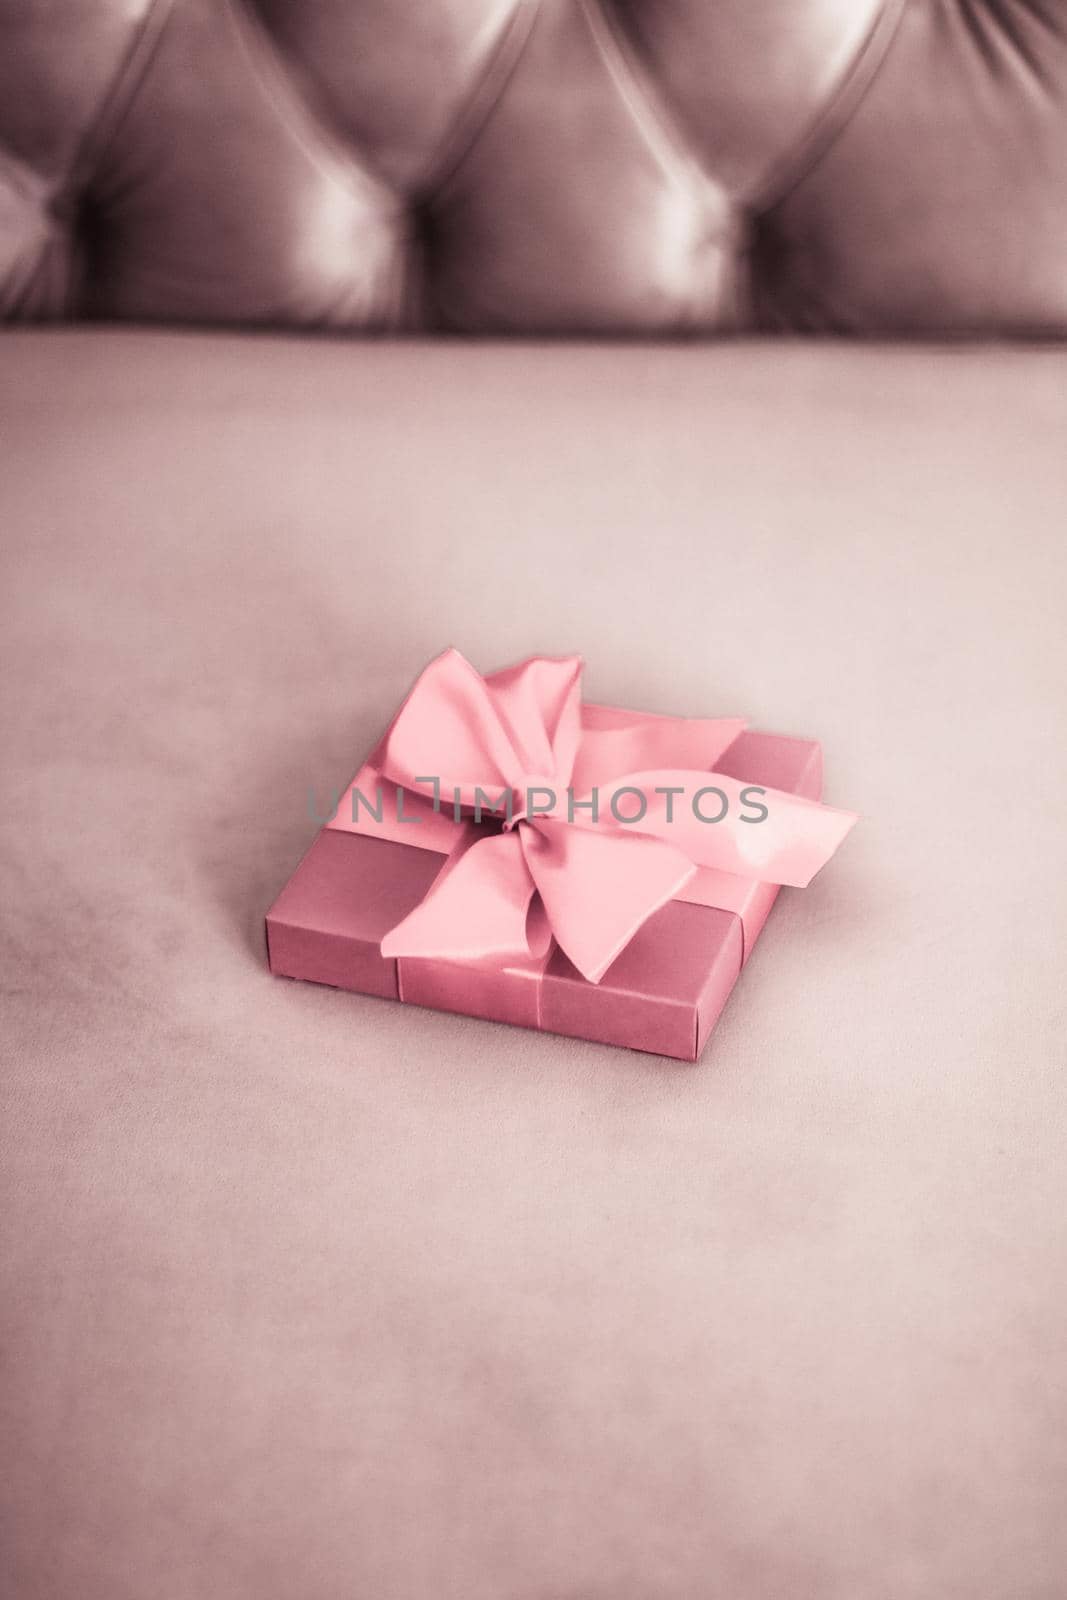 Birthday present, shop sale promotion and love celebration concept - Vintage luxury holiday blush pink gift box with silk ribbon and bow, christmas or valentines day decor